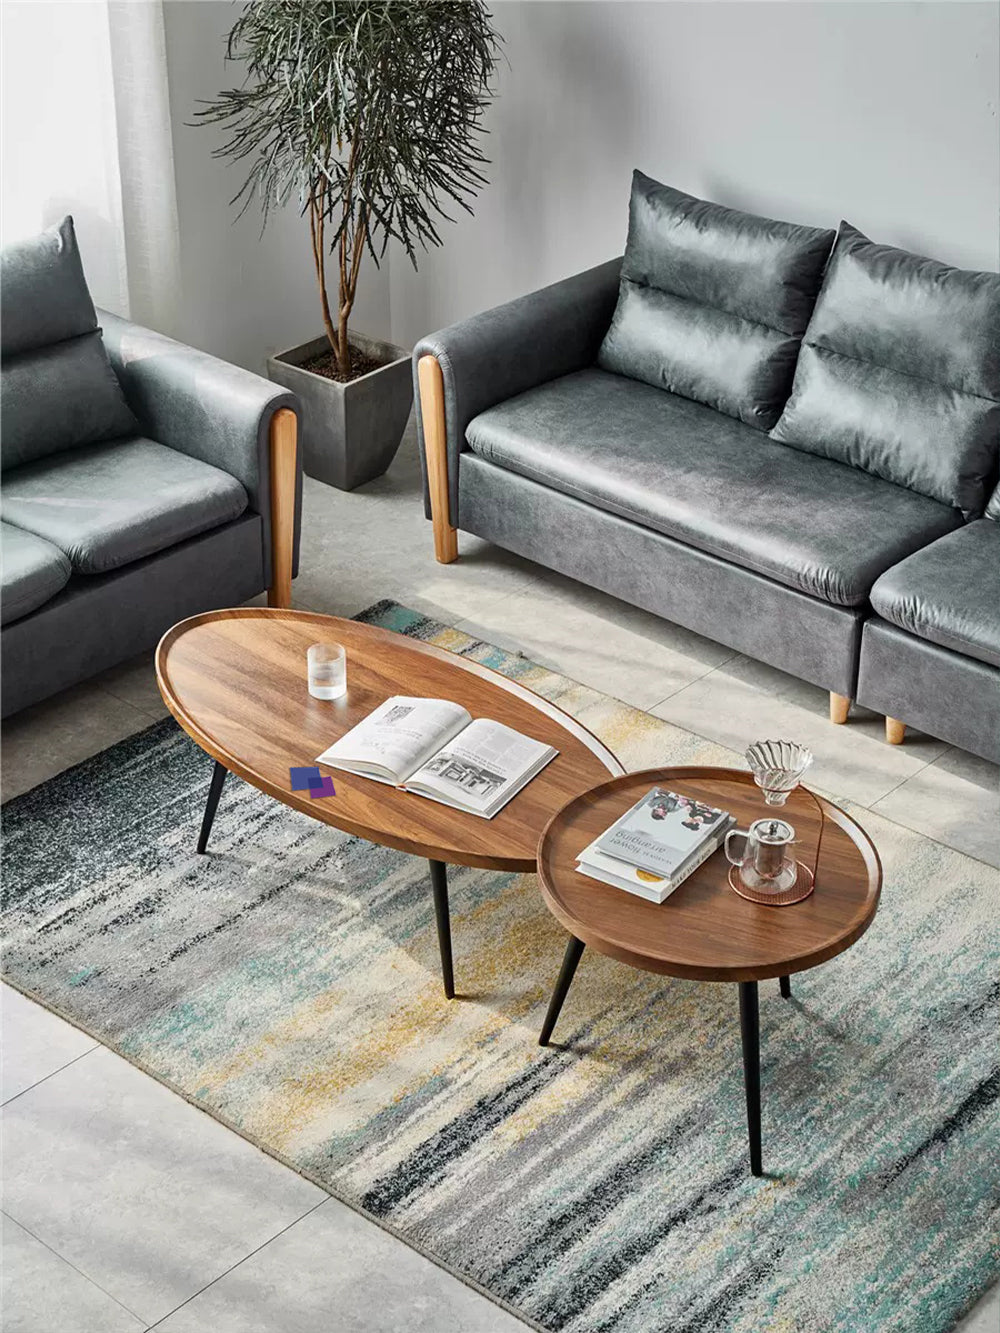 Fansafurn Modern Minimalistic Round Coffee Table - Small-sized, Luxury Design, Perfect for Living Rooms